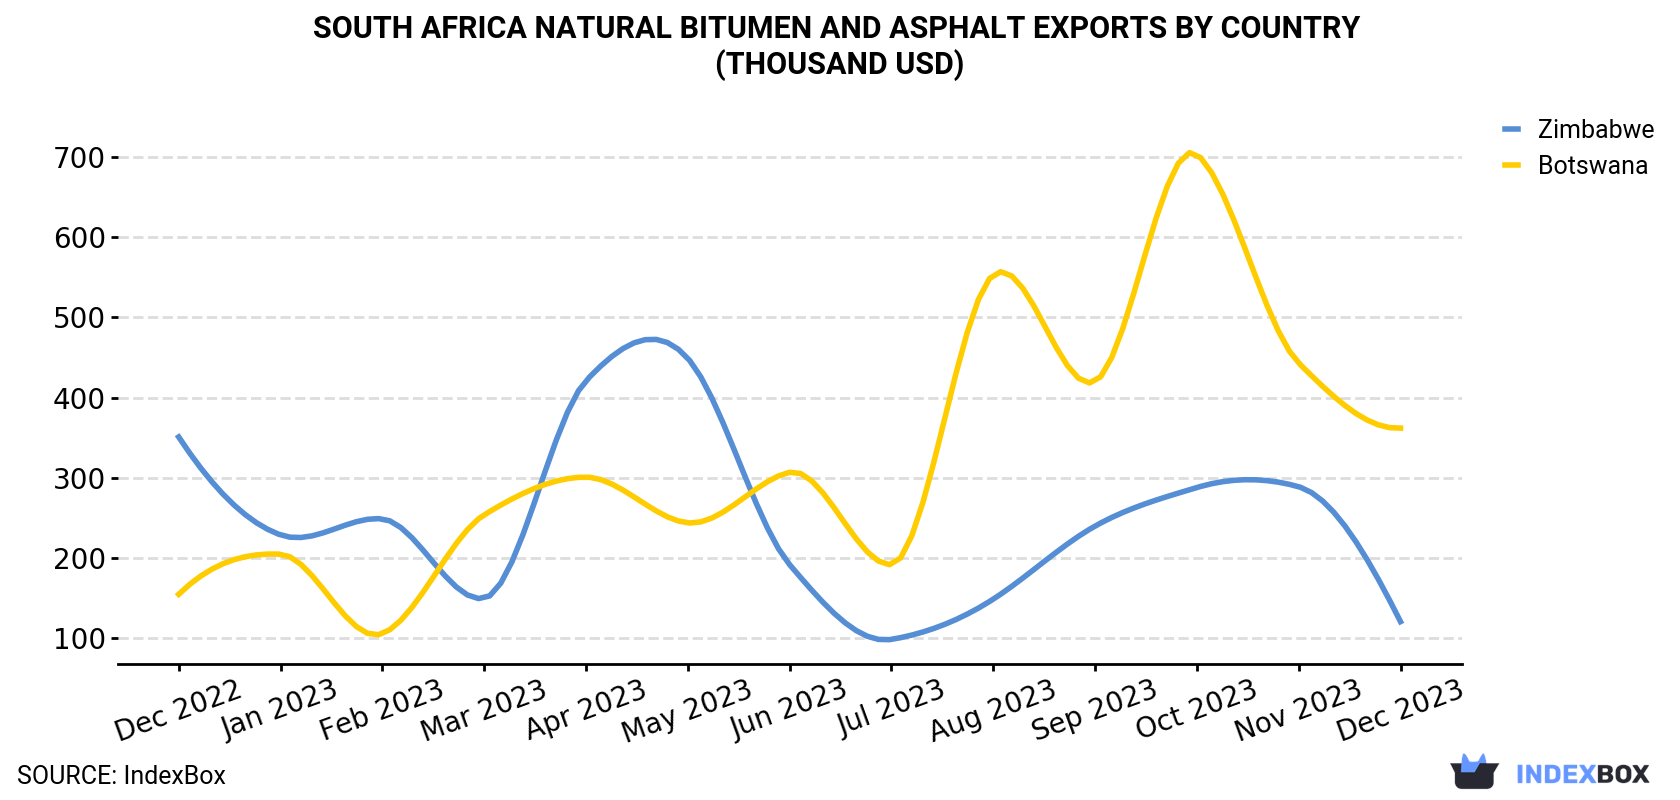 South Africa Natural Bitumen and Asphalt Exports By Country (Thousand USD)